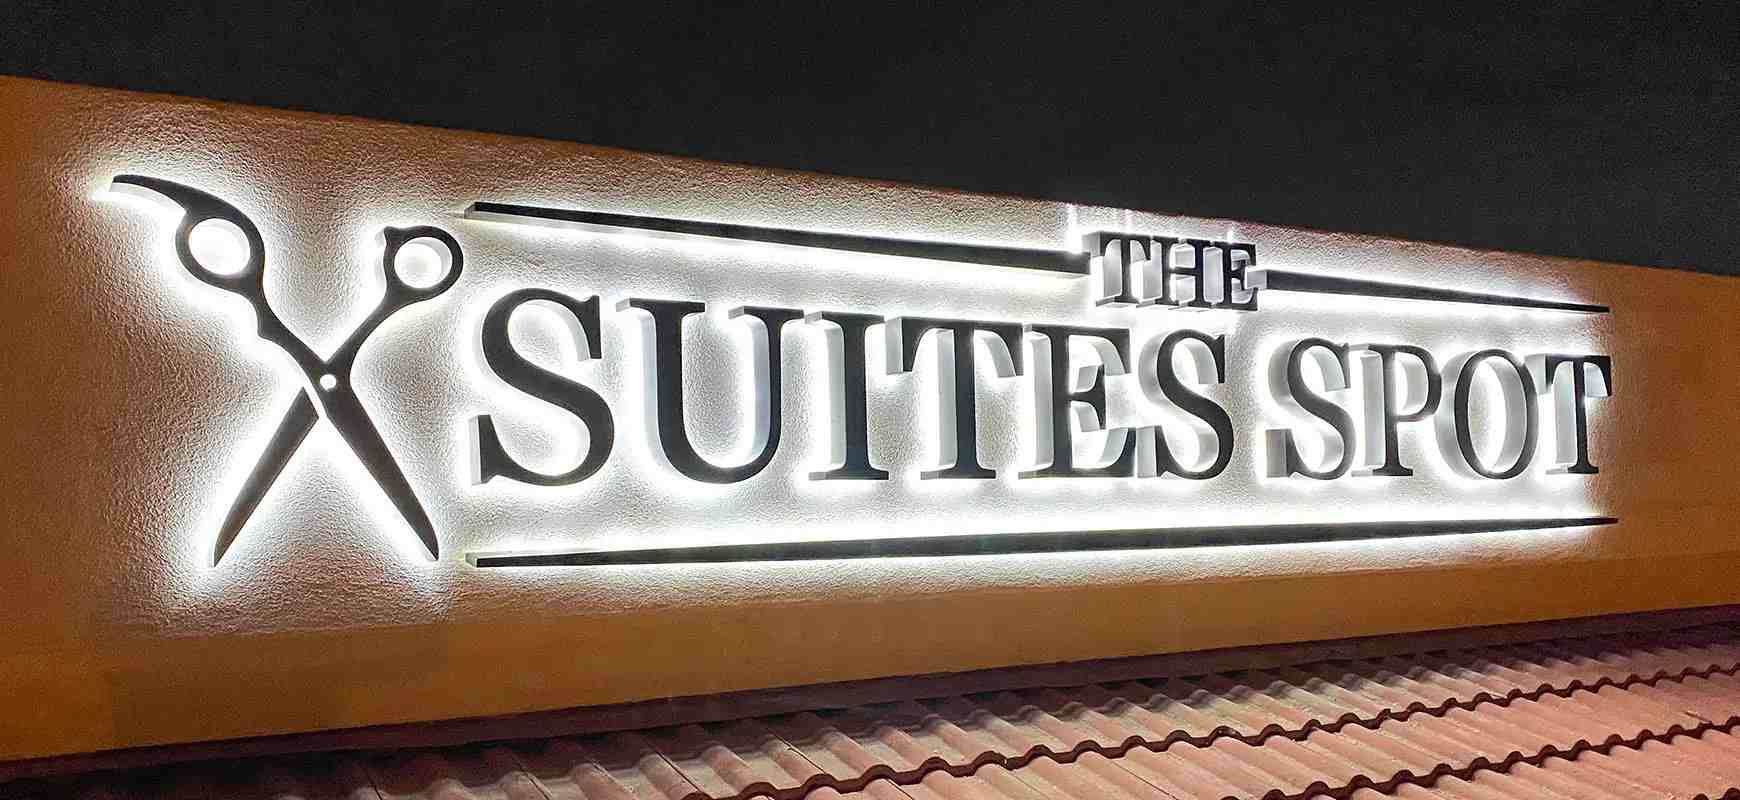 The Suites Spot backlit dimensional letter signage made of lexan and aluminum placed outdoors